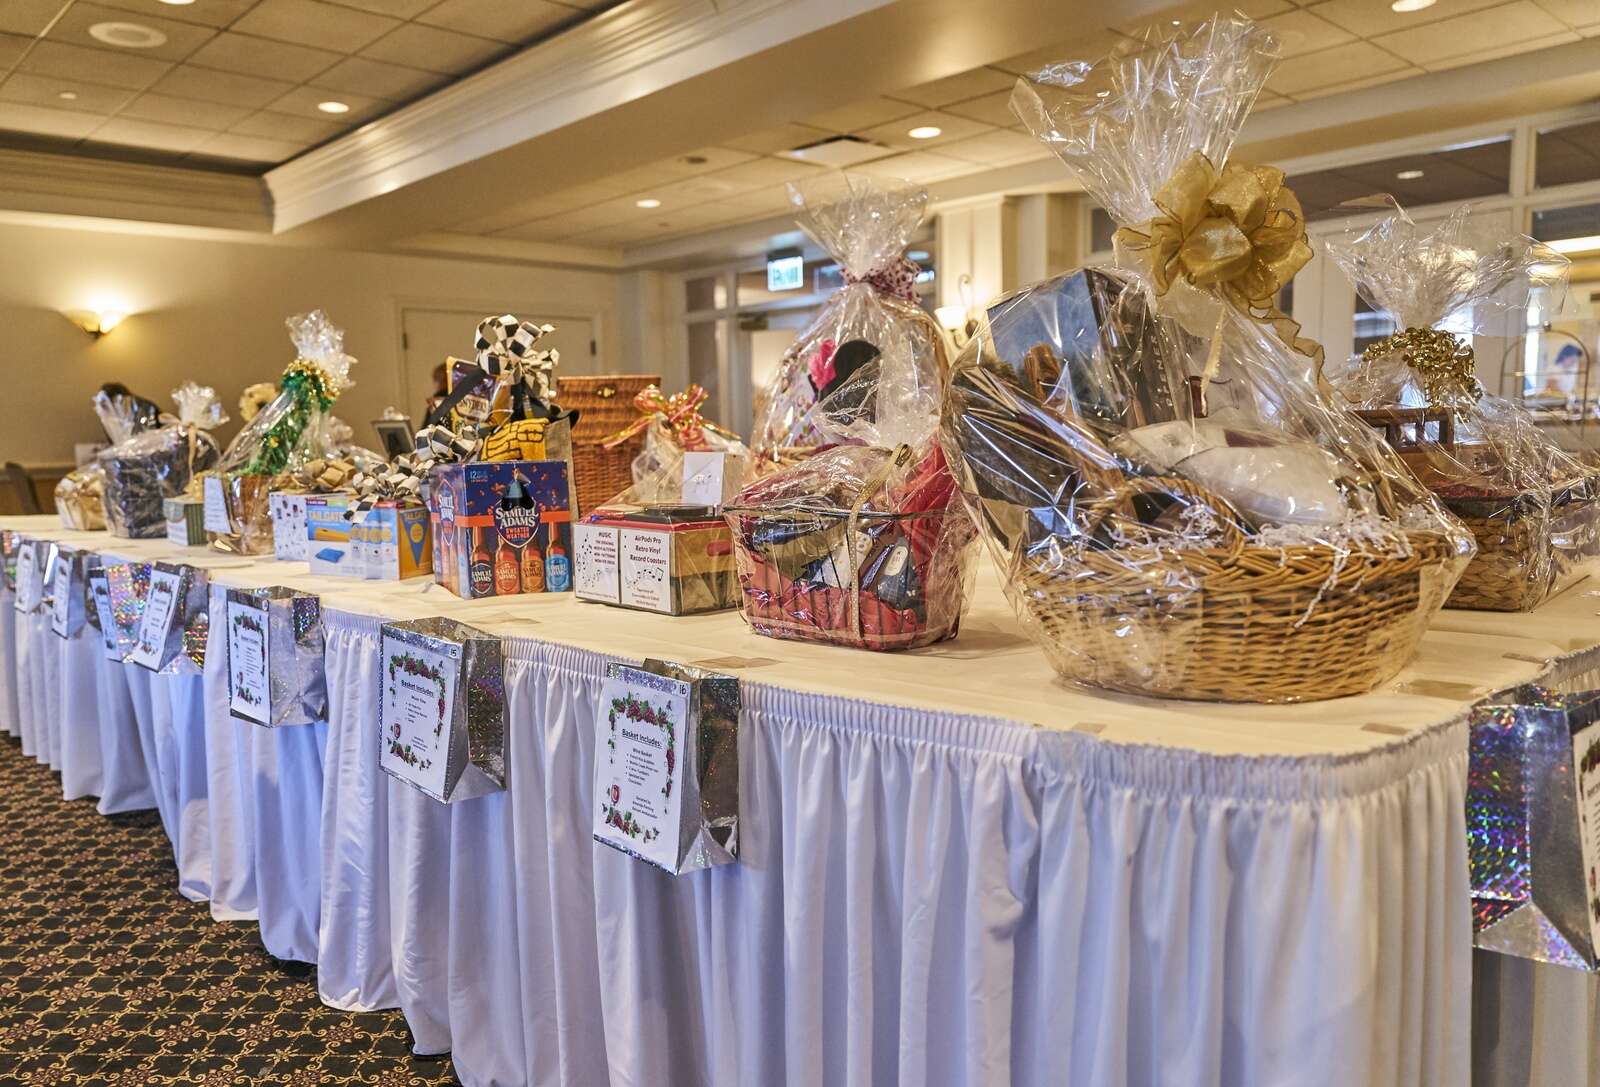 Line of prizes up for grabs at the Signature Sensations fundraiser